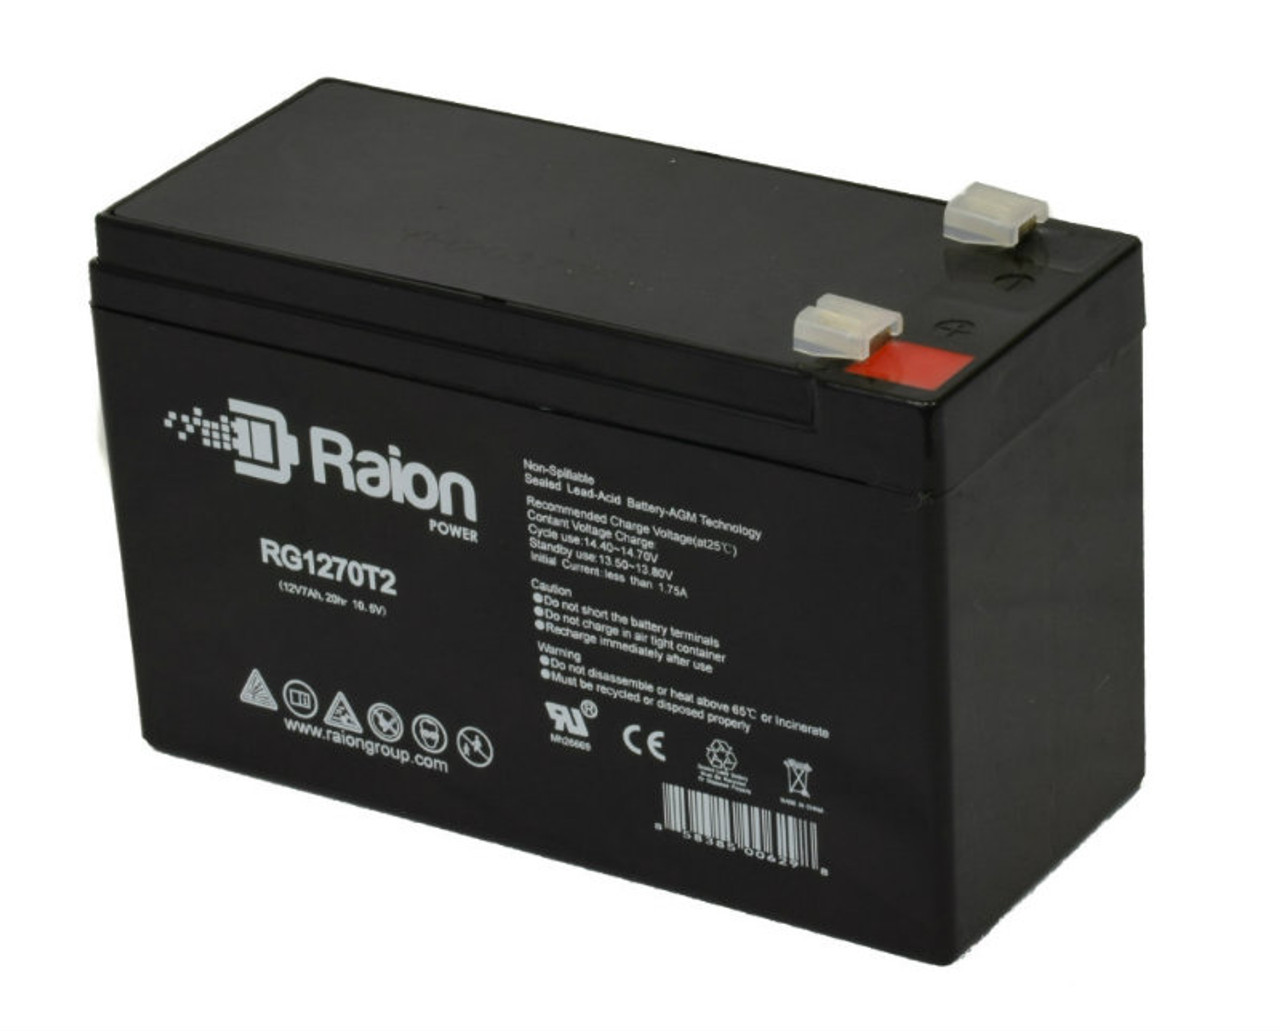 Raion Power RG1270T1 12V 7Ah Non-Spillable Replacement Battery for CooPower CP12-7.0 F1